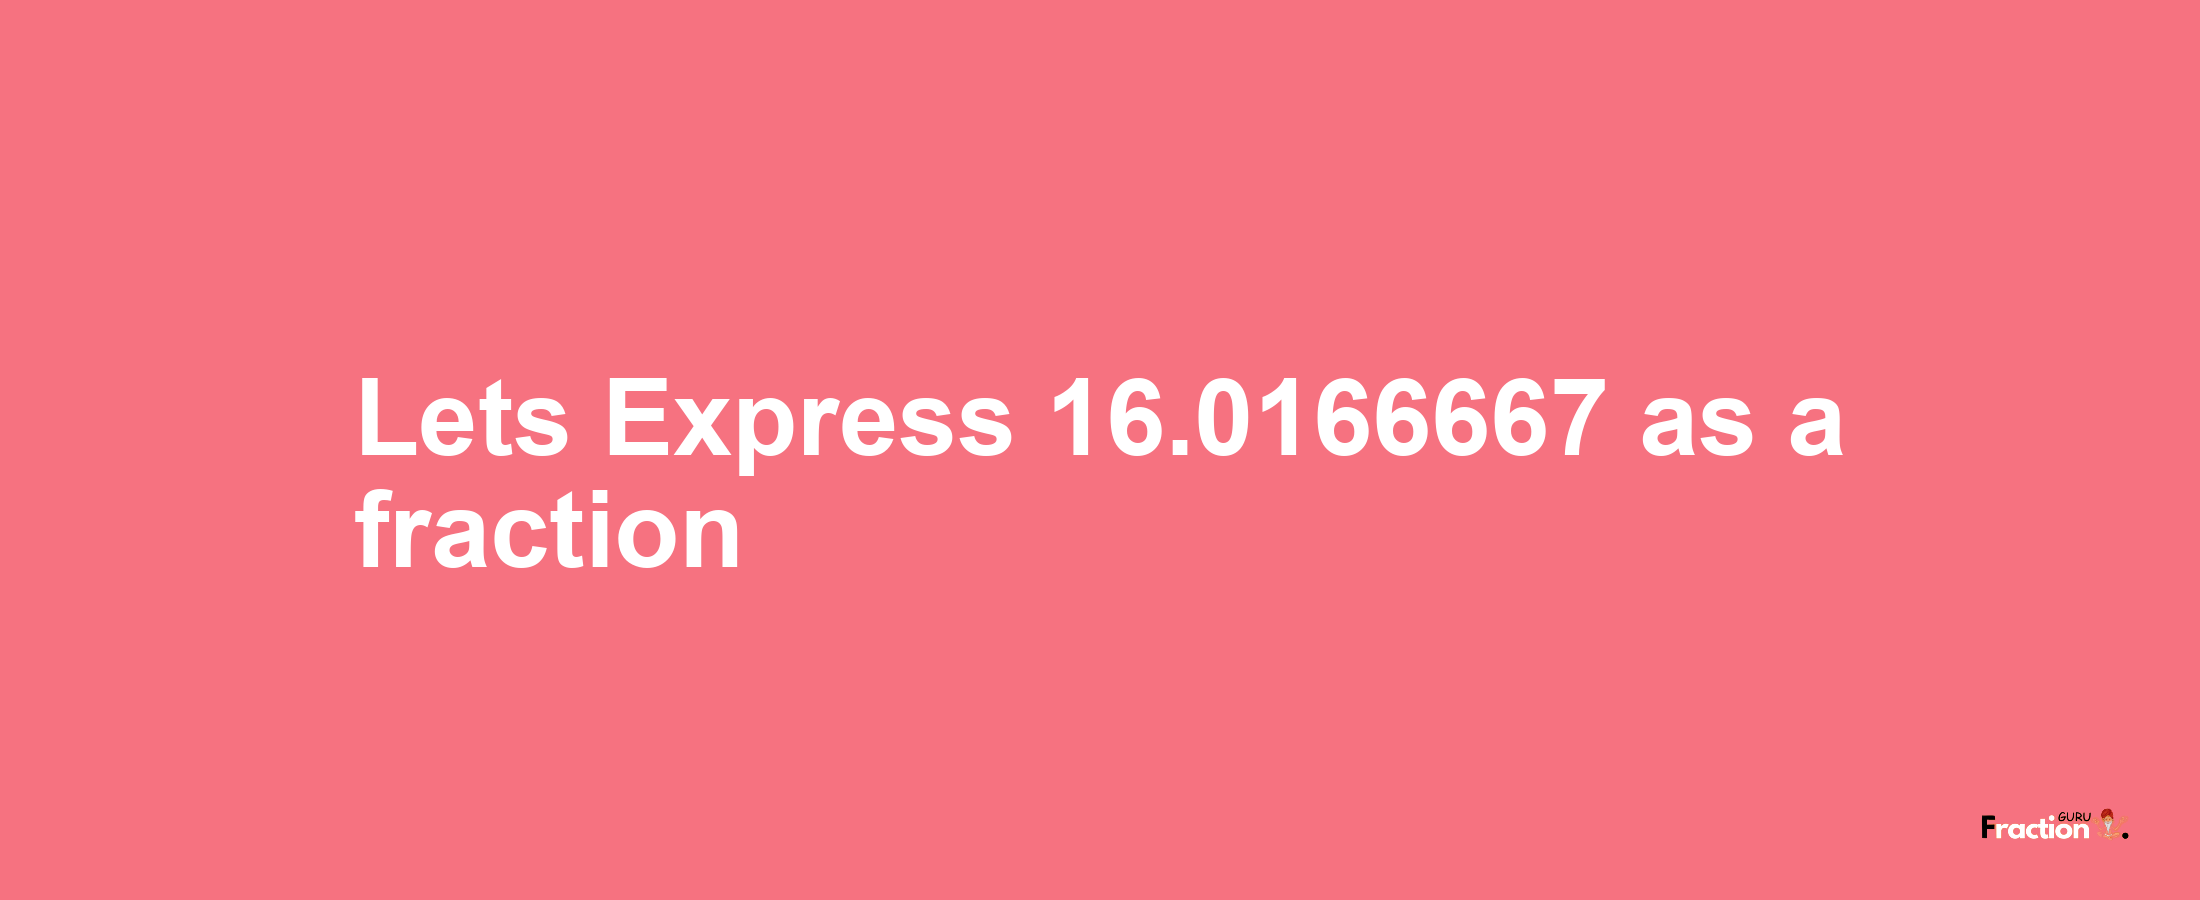 Lets Express 16.0166667 as afraction